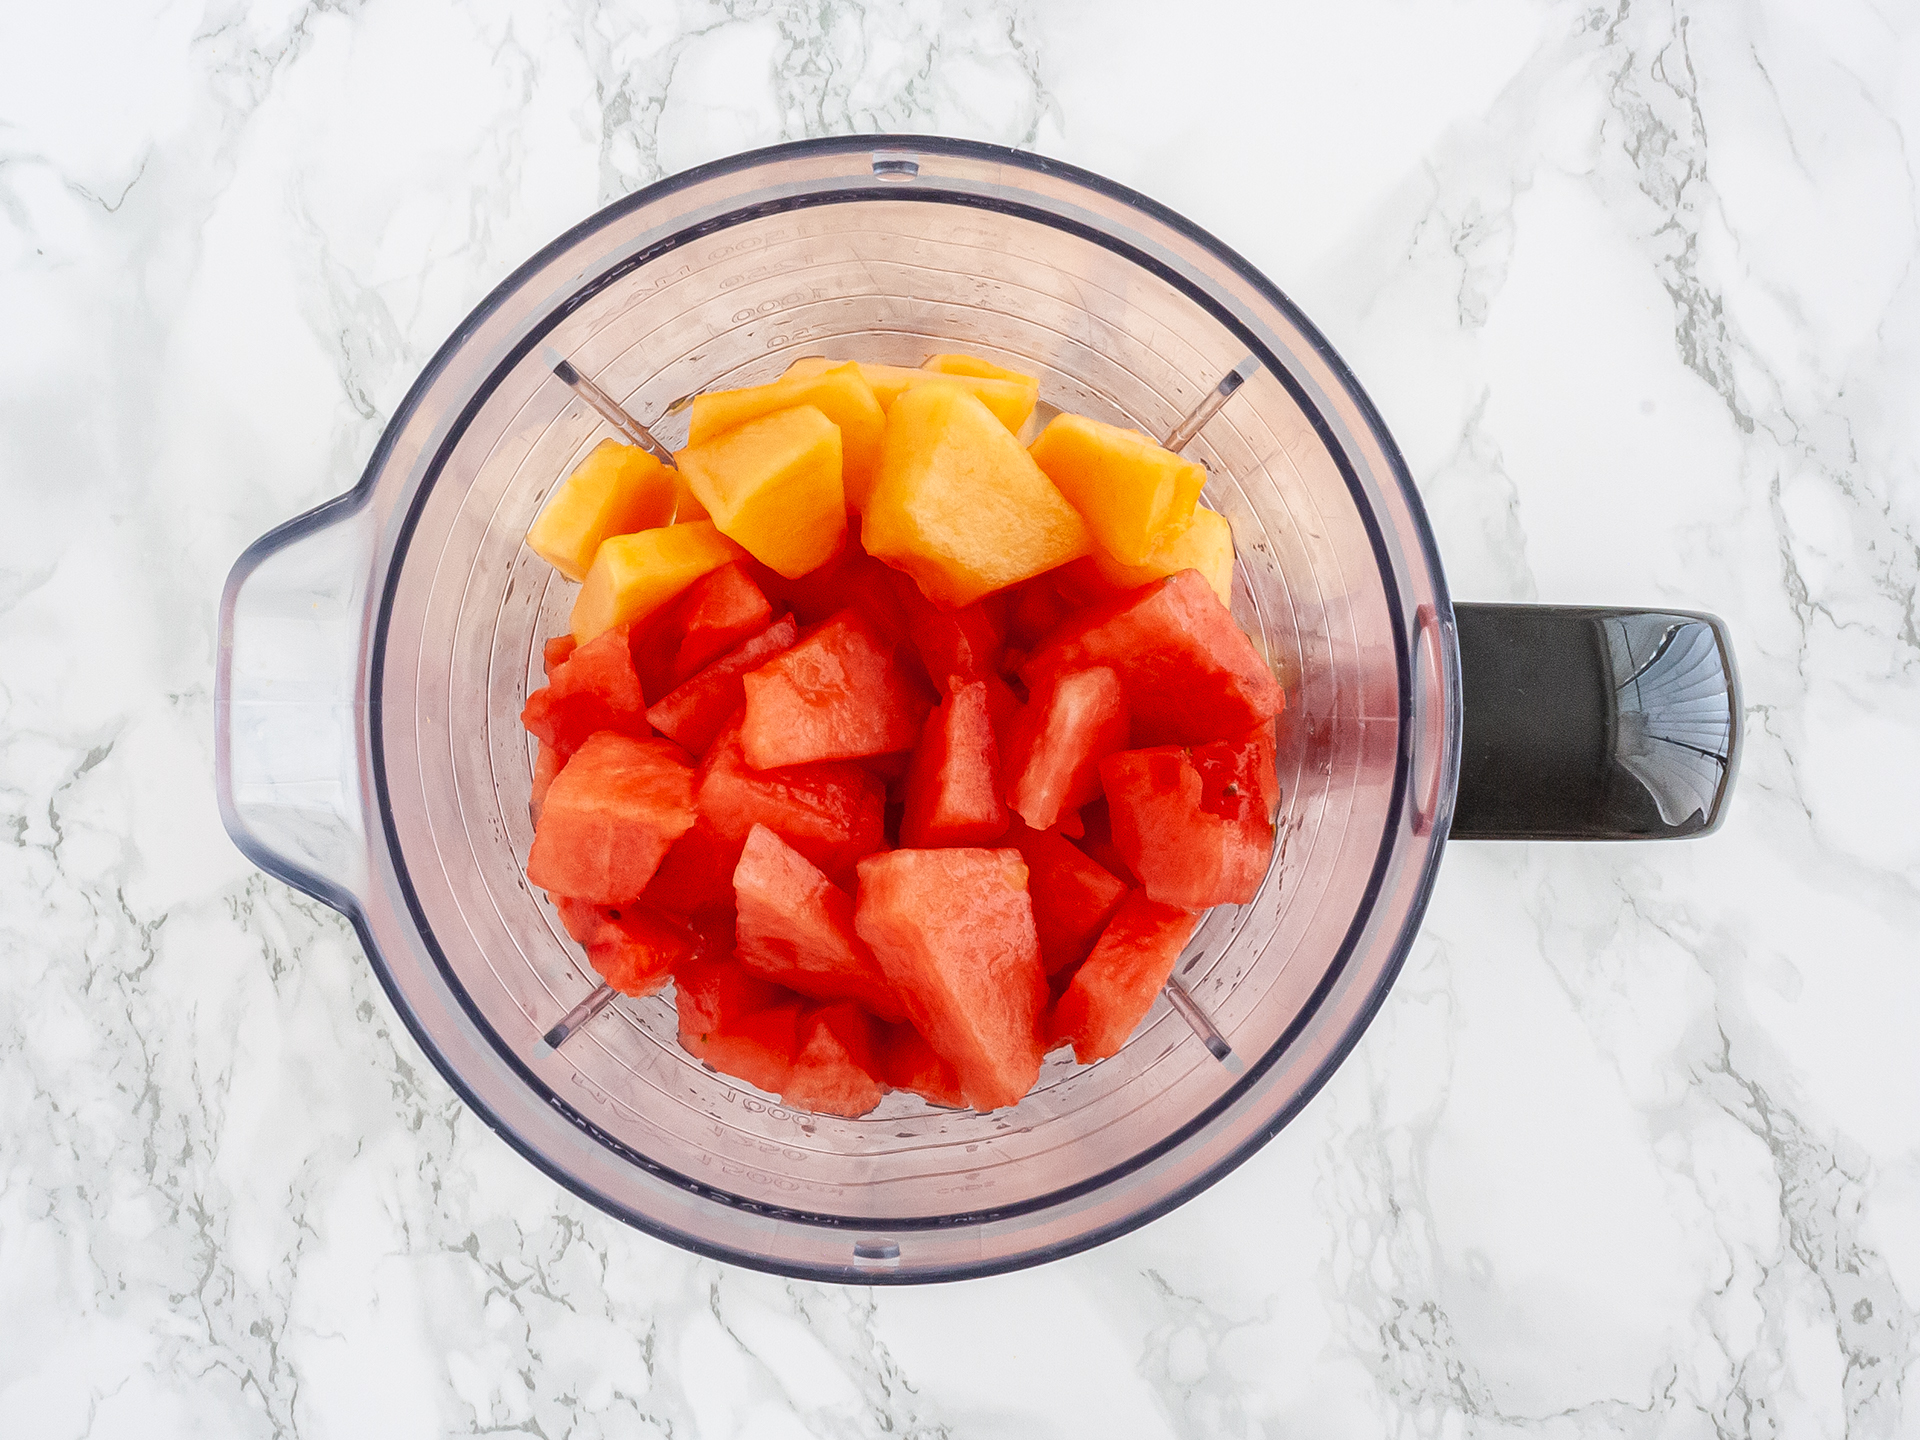 Melon and watermelon in blender.